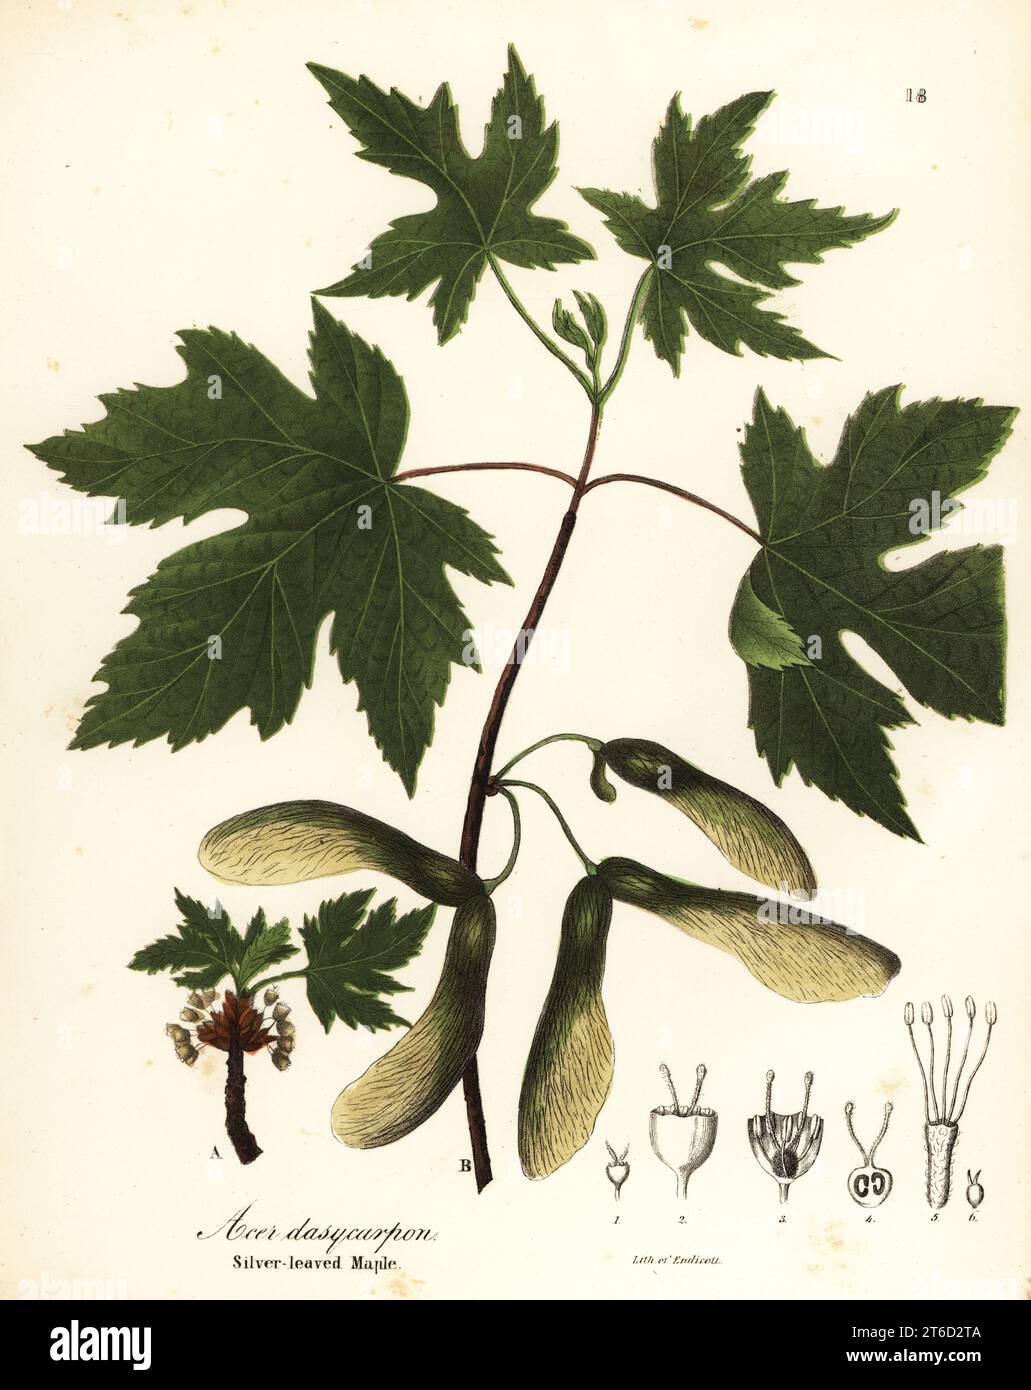 Silver maple, Acer saccharinum (Silver-leaved maple, Acer dasycarpum). Handcoloured lithograph by Endicott after a botanical illustration from John Torreys A Flora of the State of New York, Carroll and Cook, Albany, 1843. The plates drawn by John Torrey, Agnes Mitchell, Elizabeth Paoley and Swinton. John Torrey was an American botanist, chemist and physician 1796-1873. Stock Photo